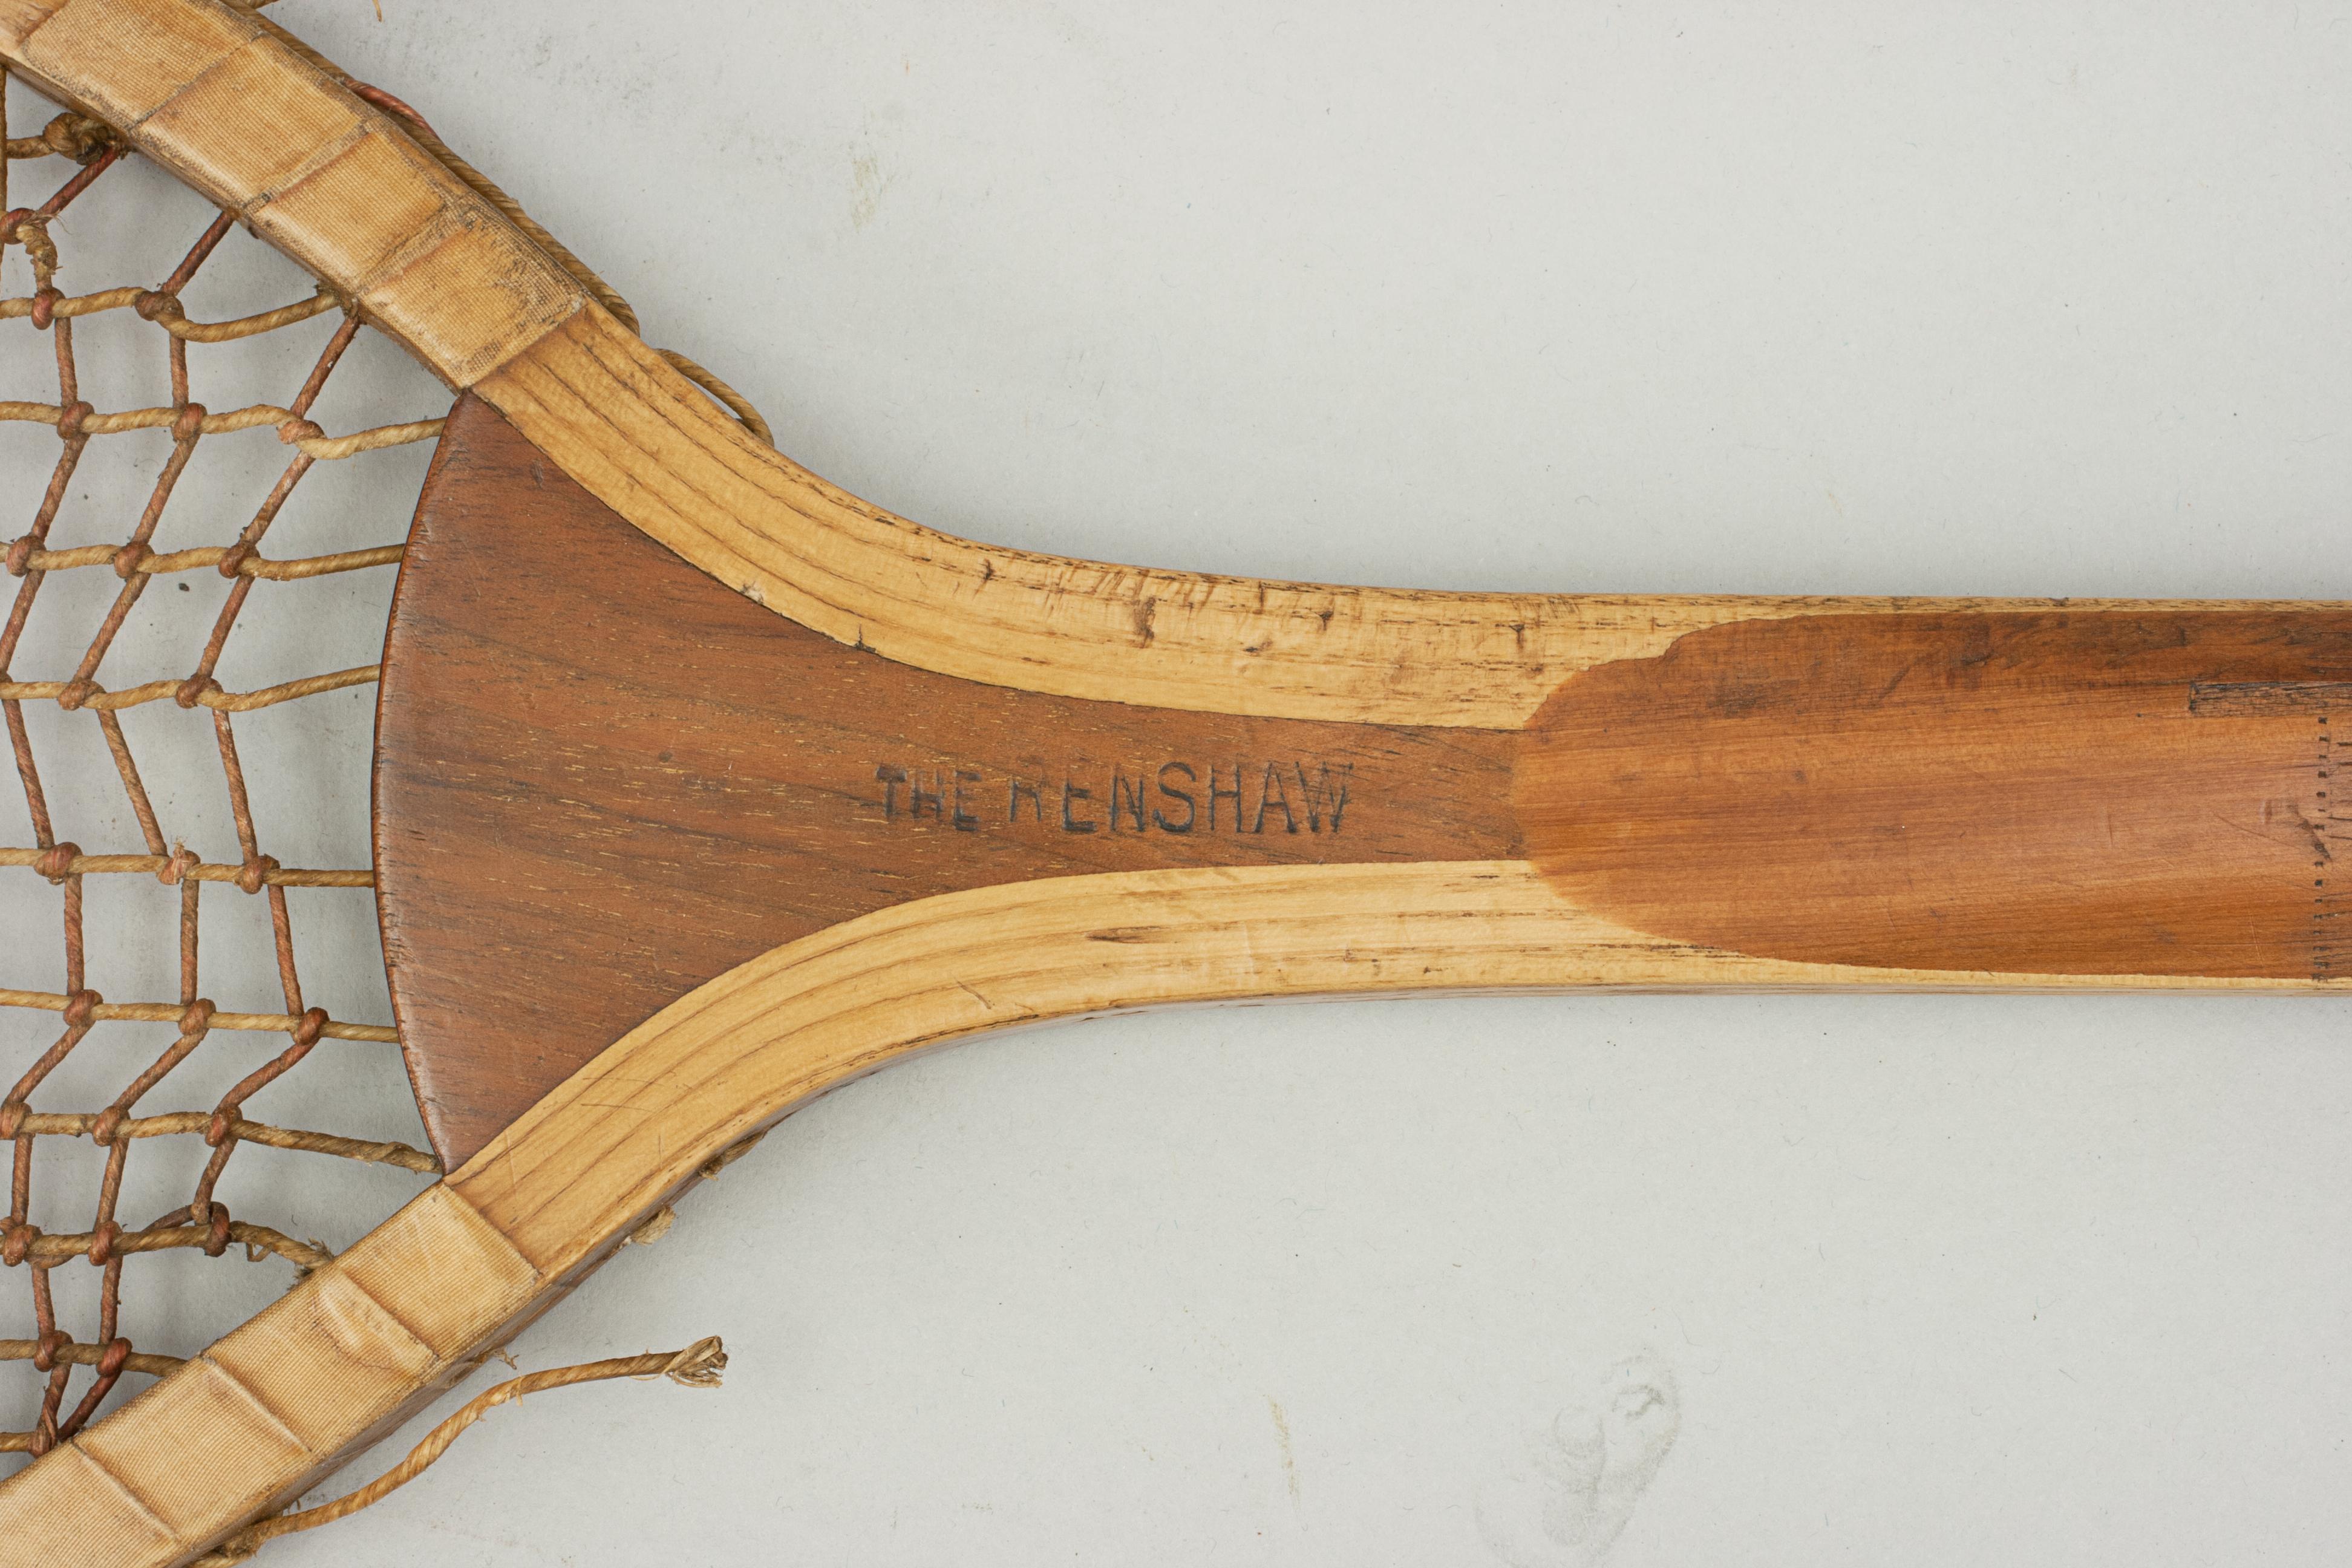 Early 20th Century Antique Lawn Tennis Racket, the Renshaw For Sale